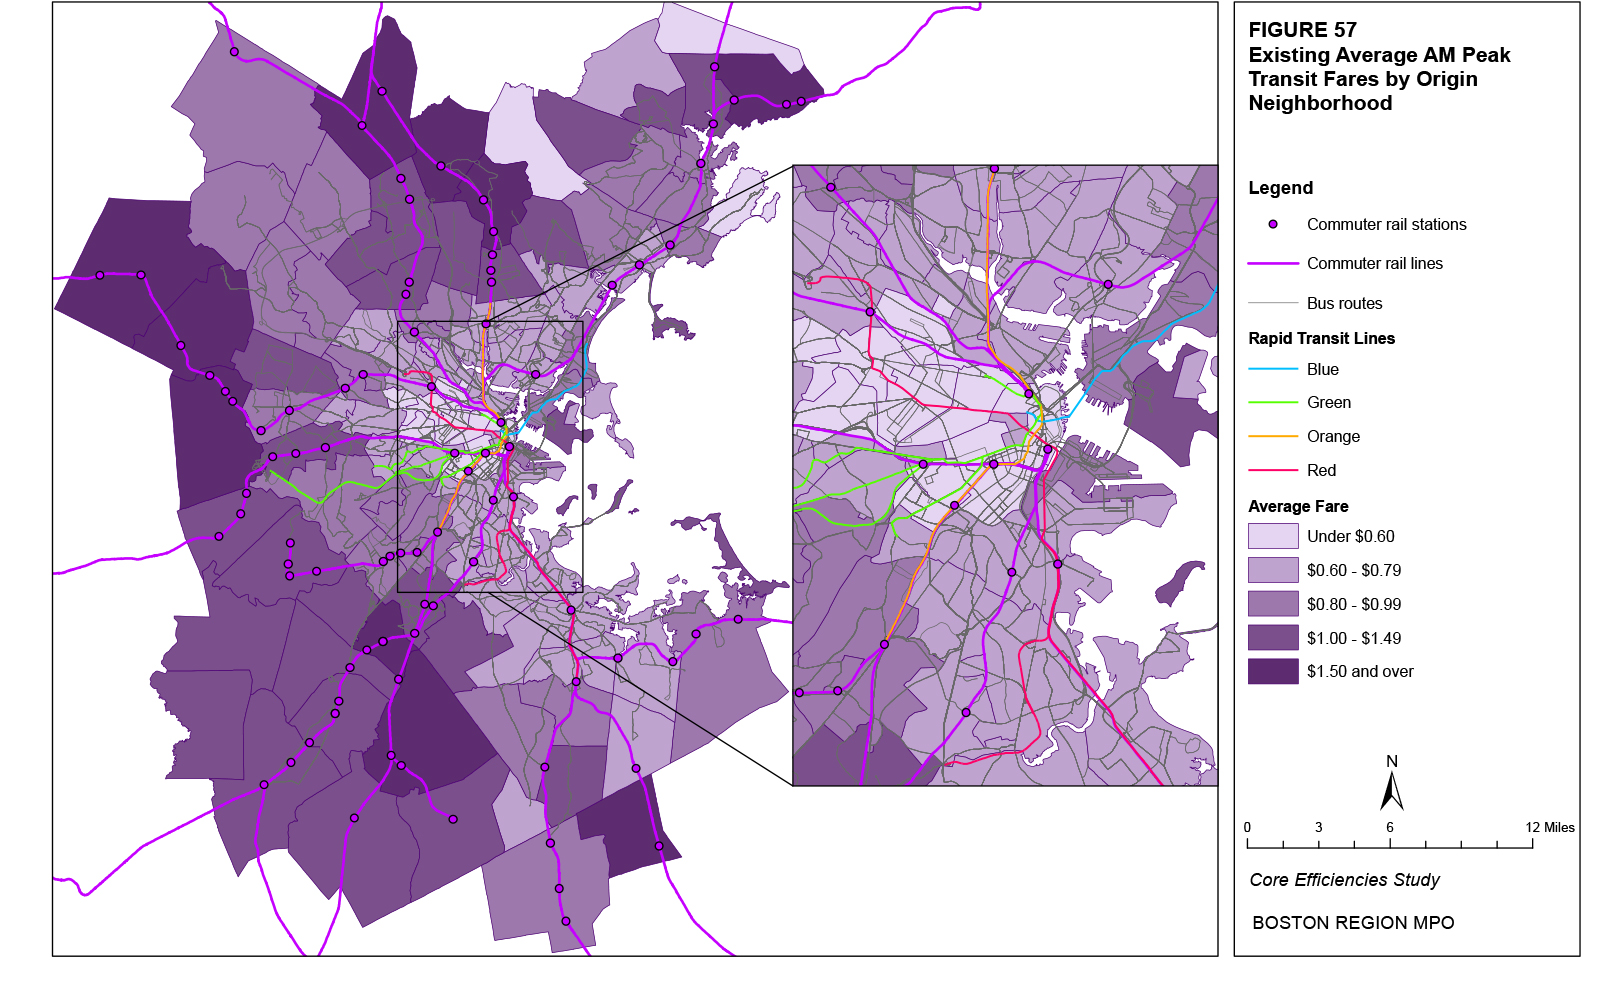 This map shows the existing average AM peak transit fares for origin trips by neighborhood.